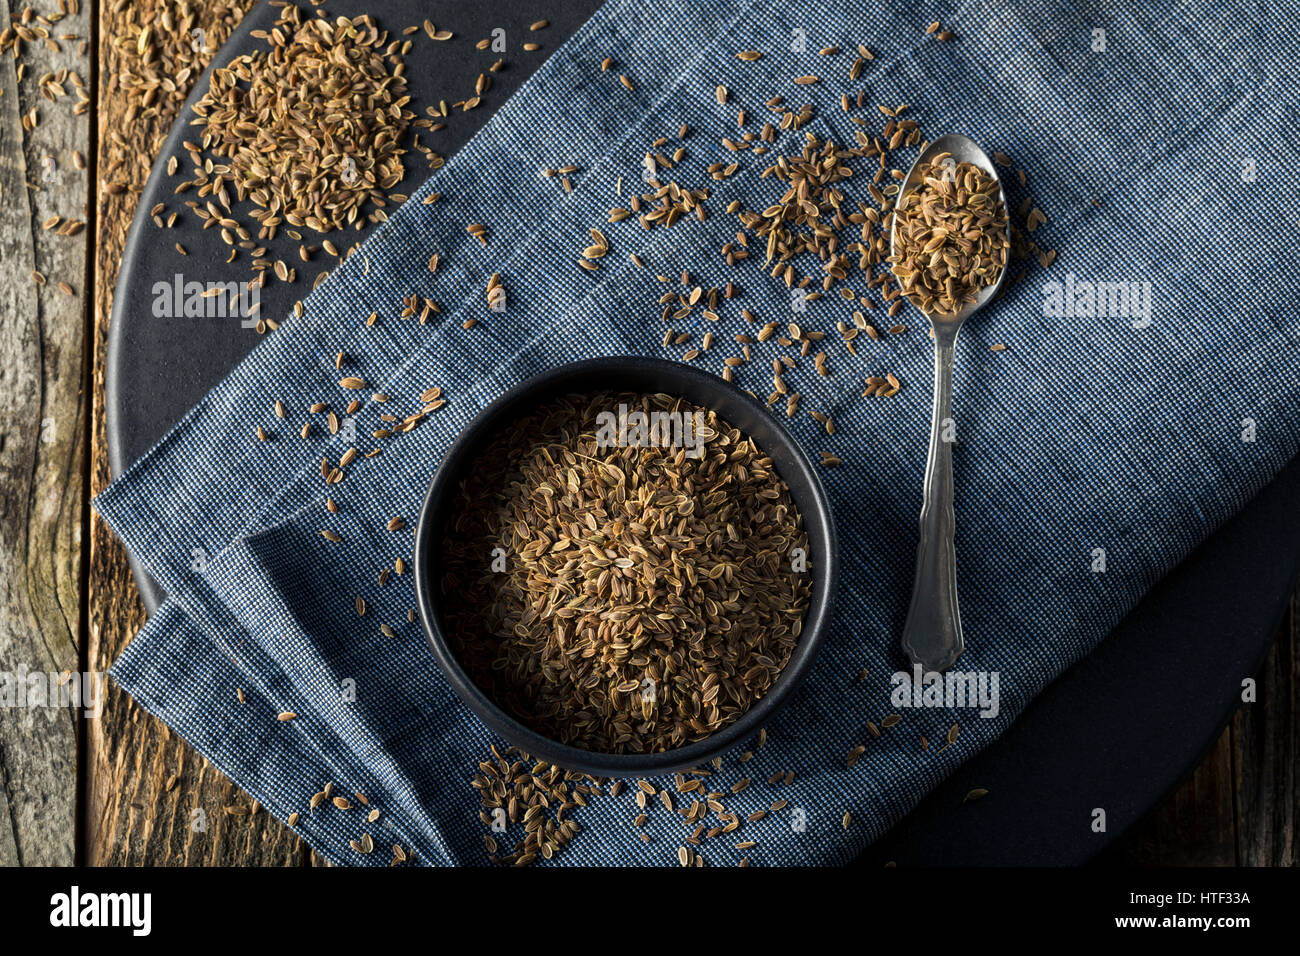 Dry Organic Tarragon Seed Spice in a Bowl Stock Photo